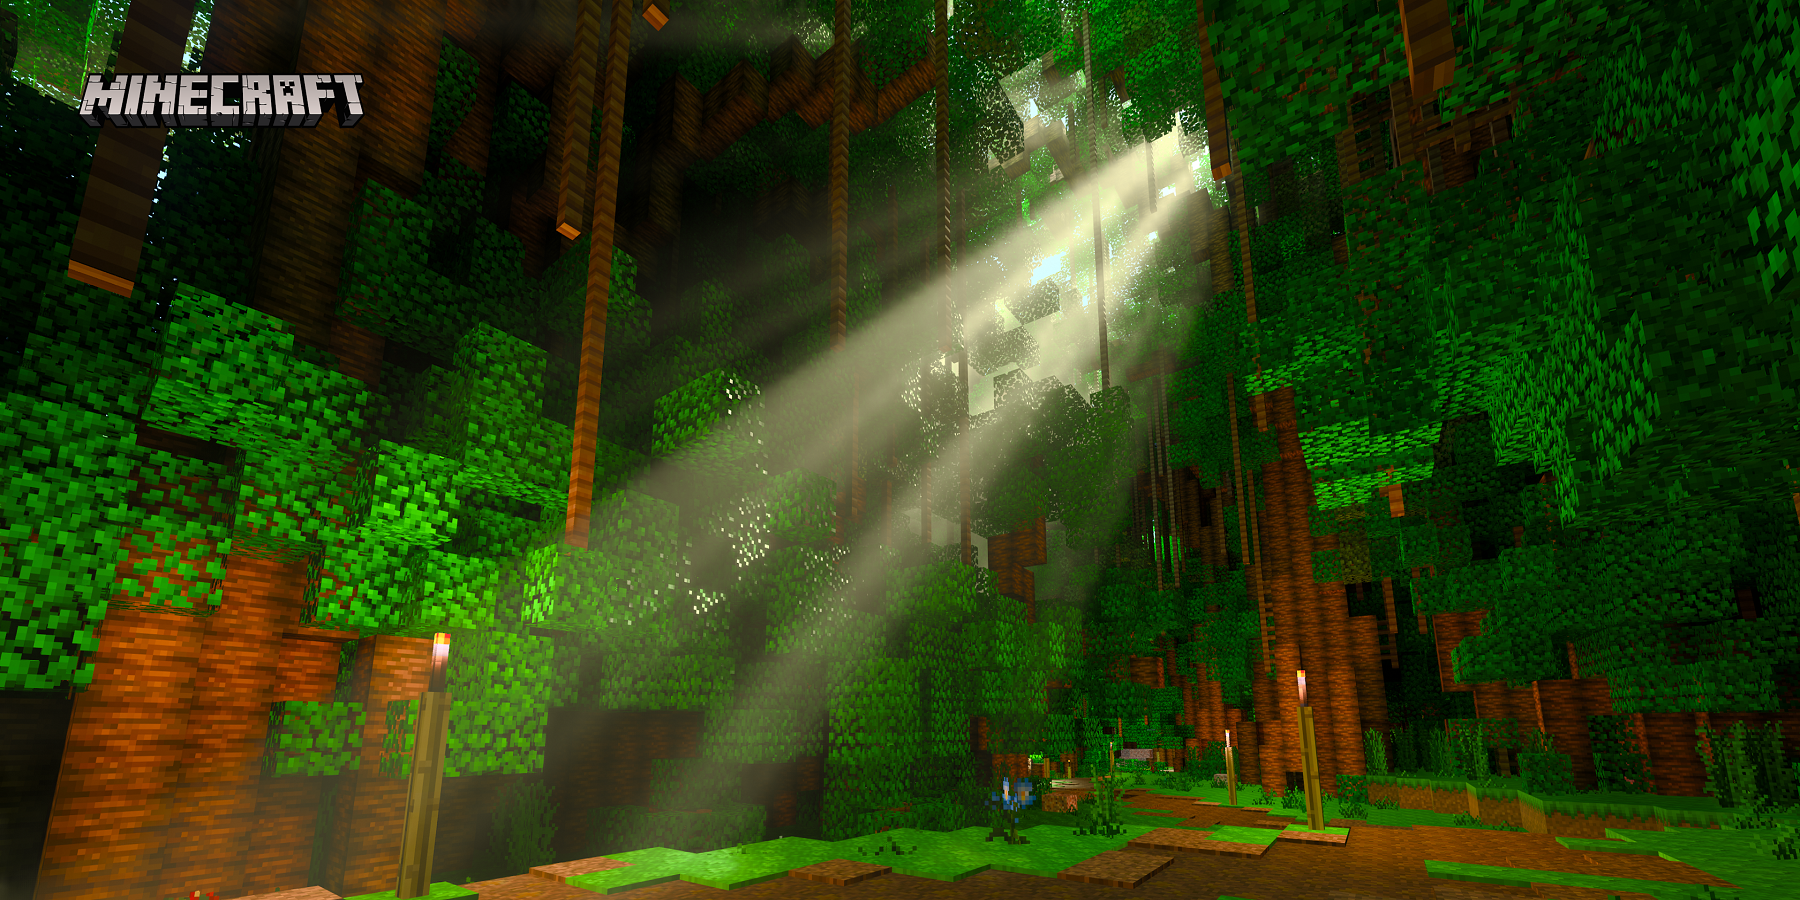 A screenshot from Minecraft showing a shaft of light beaming into a forest.